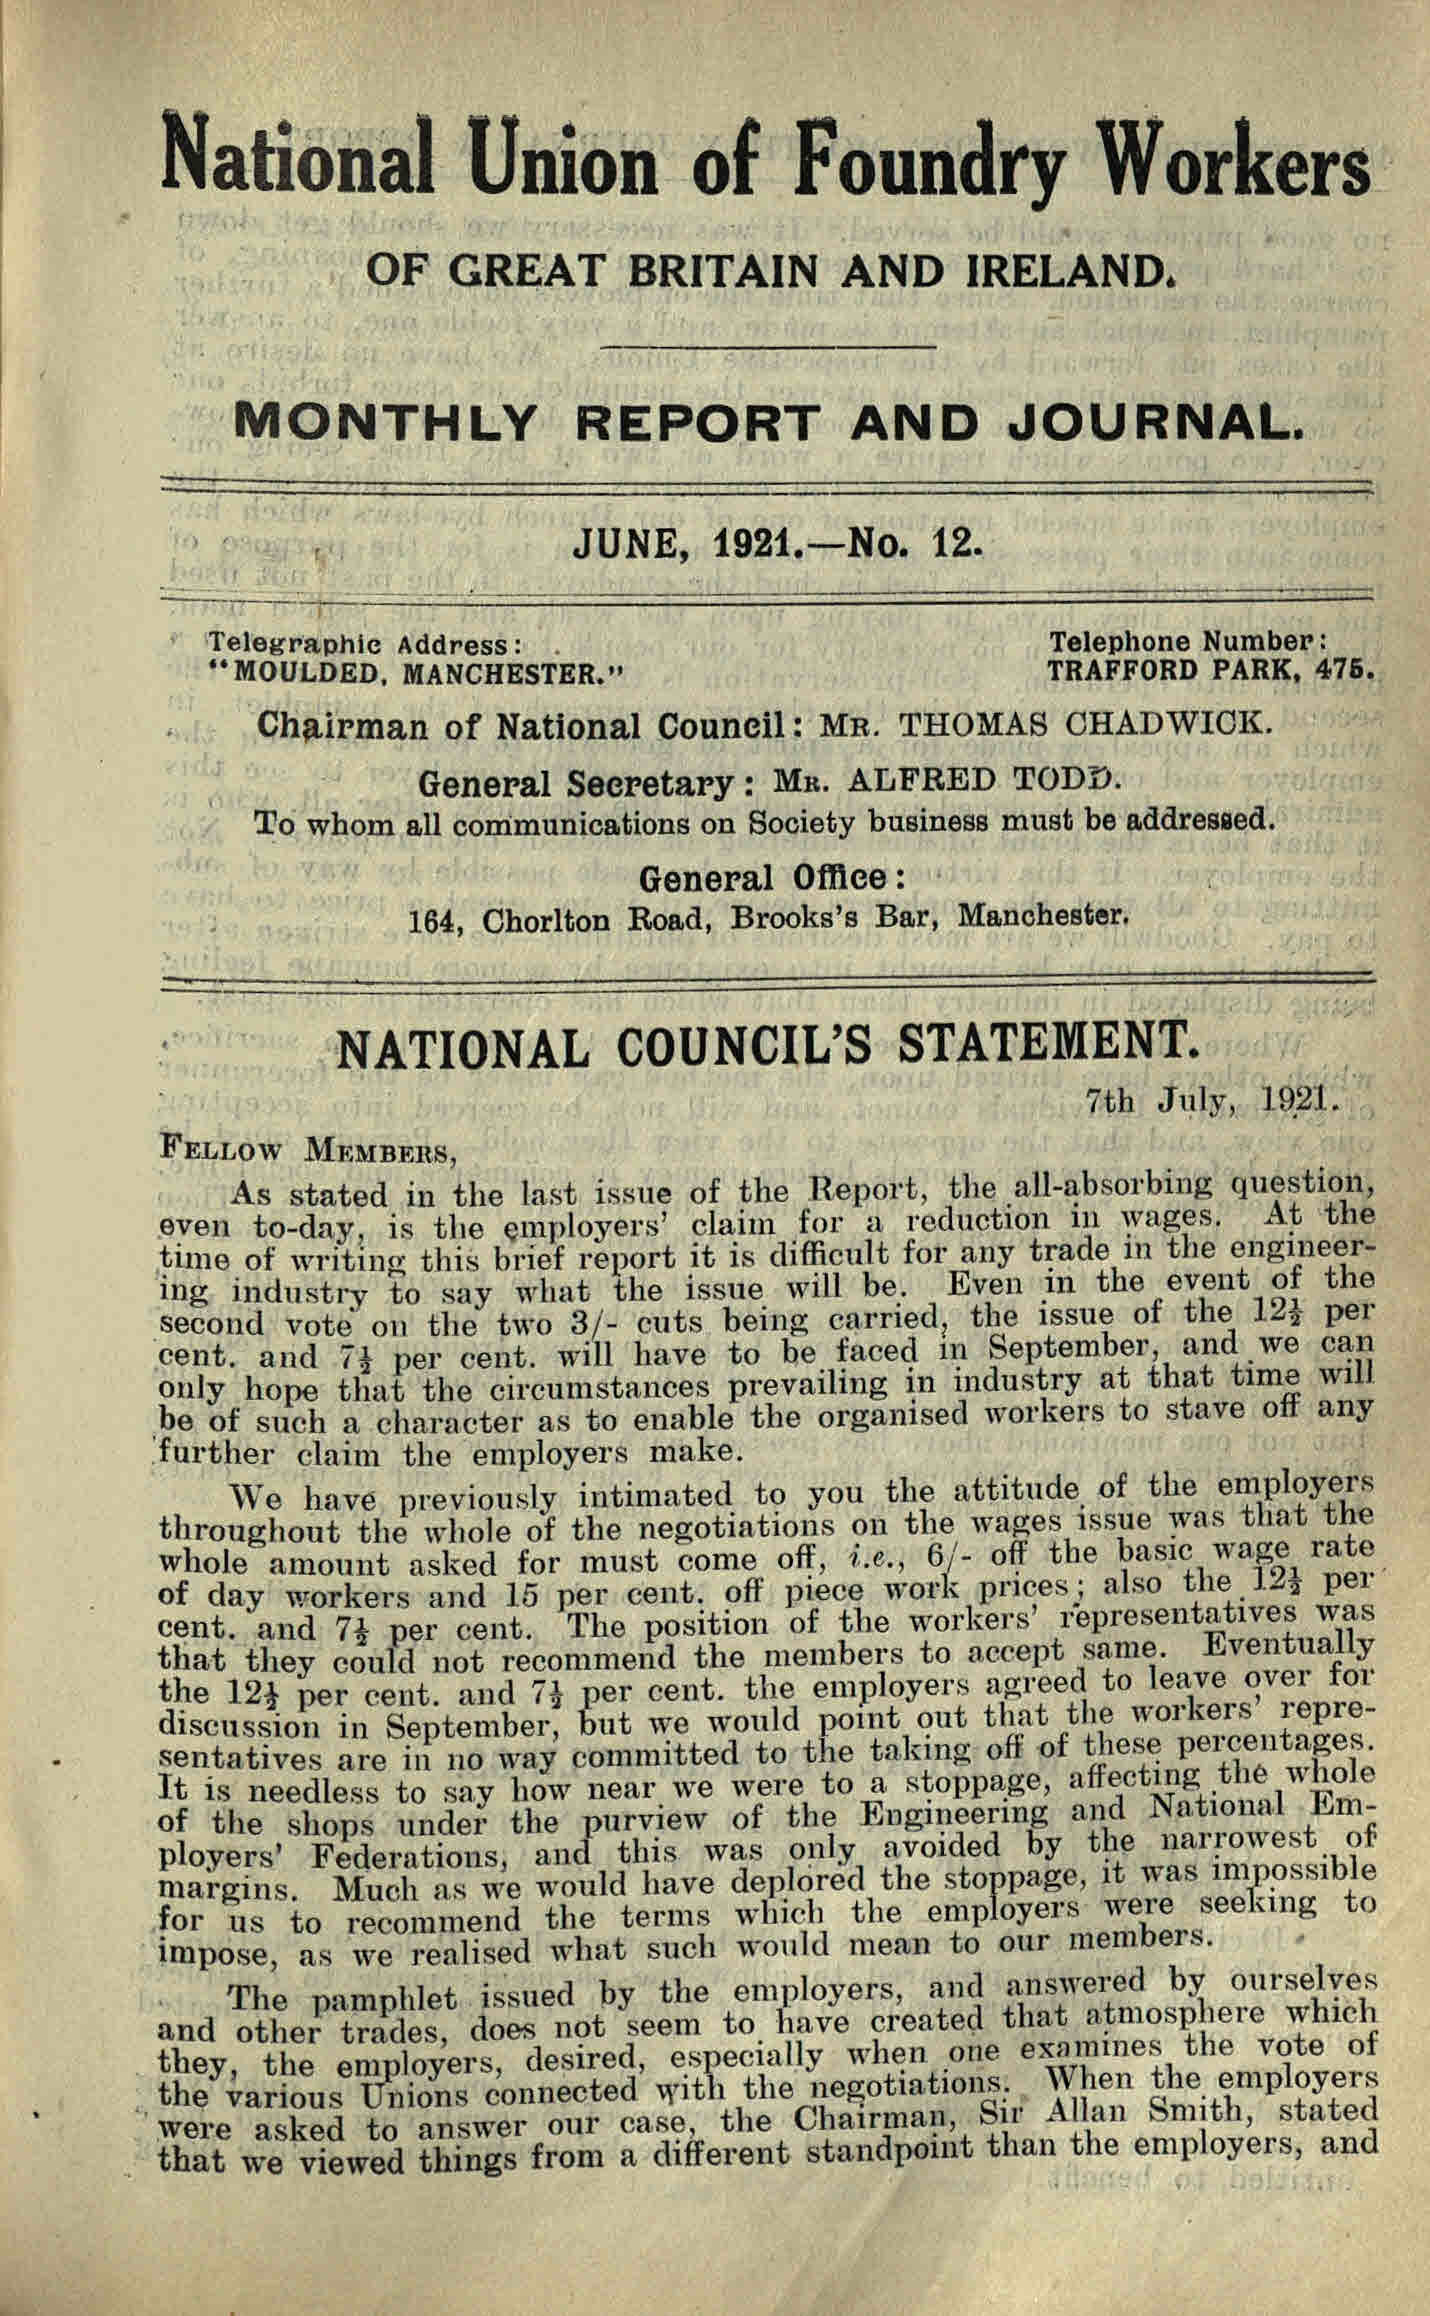 Front page of Monthly Report & Journal for June 1921